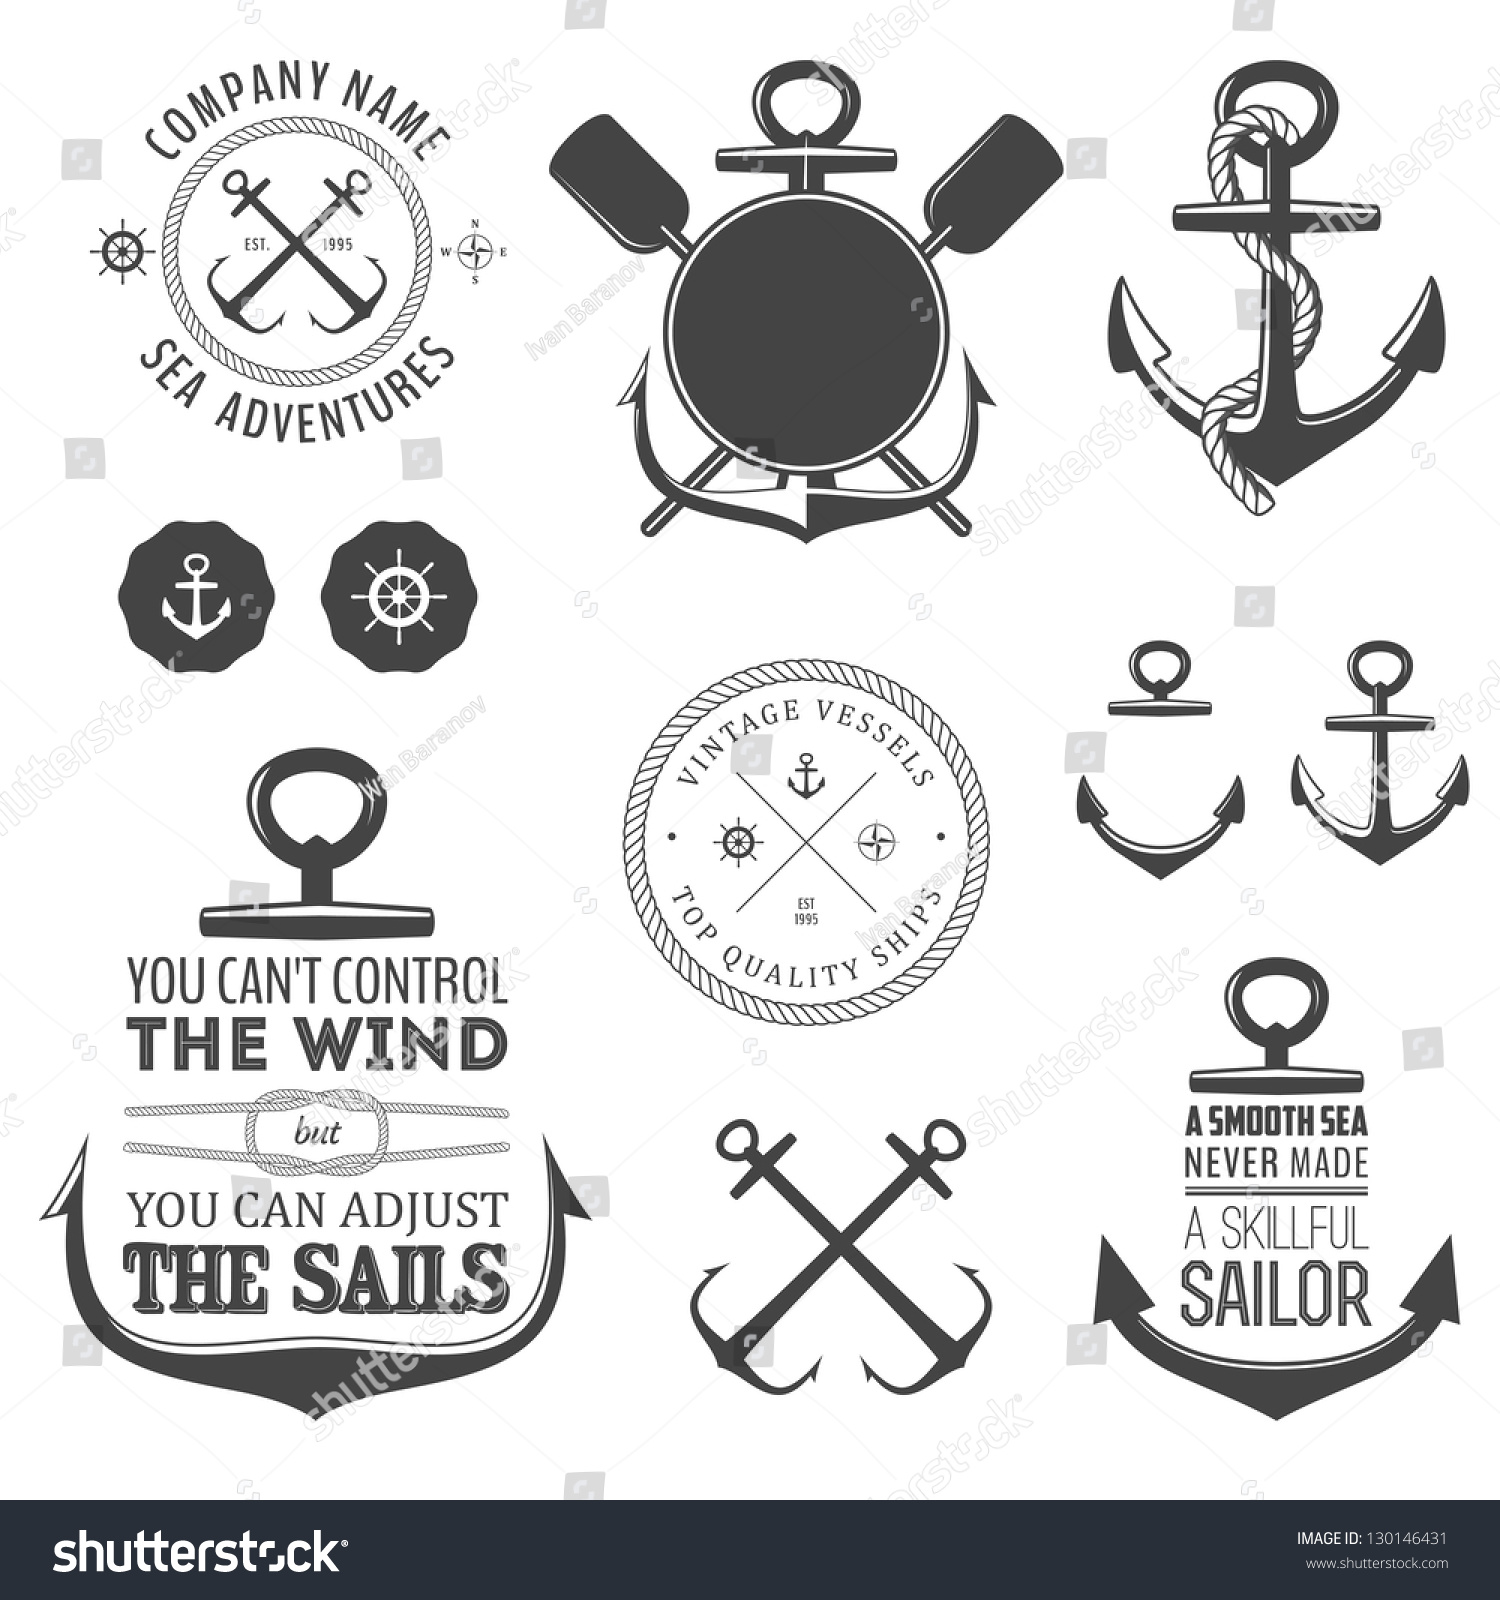 Set Of Vintage Nautical Labels, Icons And Design Elements Stock Photo ...